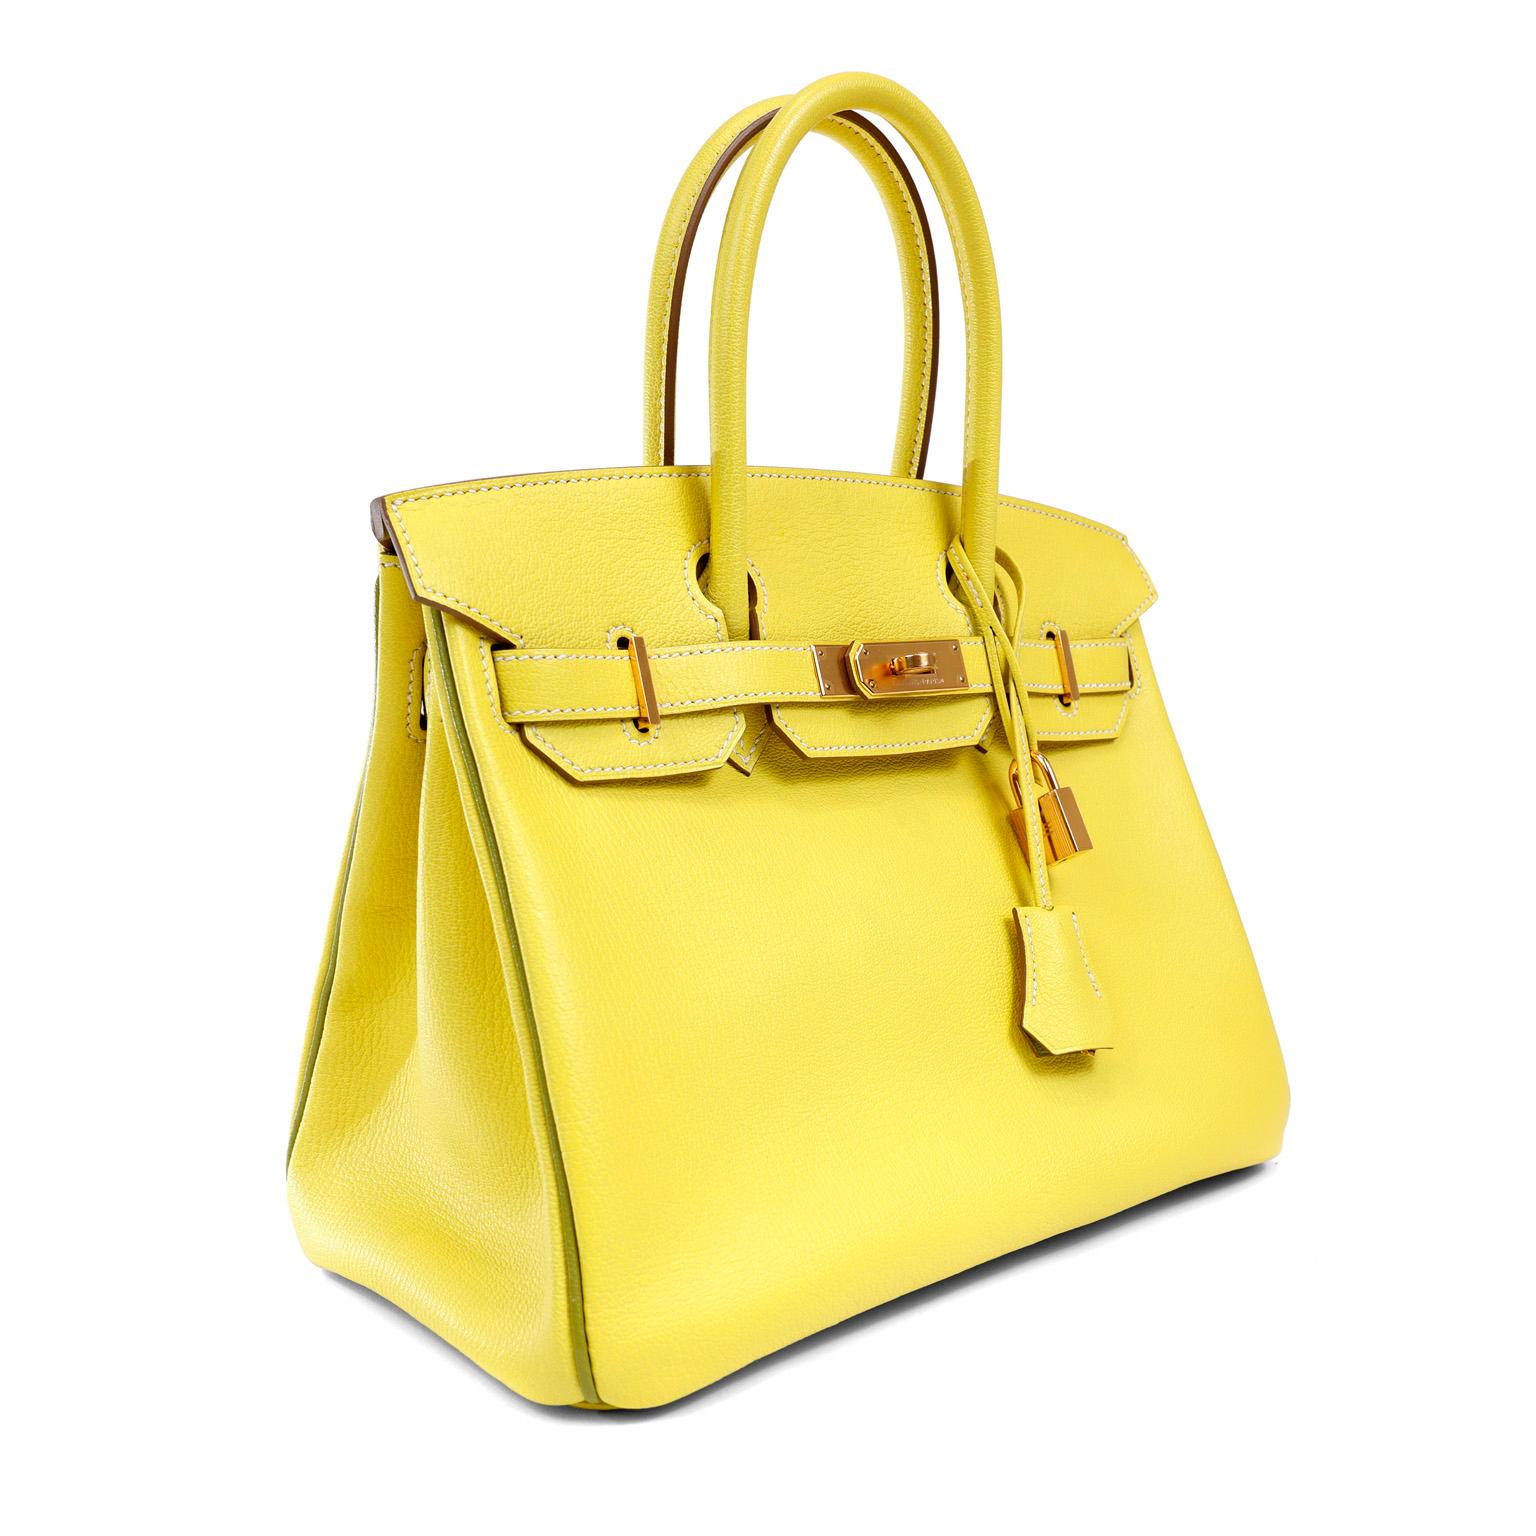 This authentic Hermès Yellow Chevre 30 cm Horseshoe Birkin is in pristine unworn condition.  The protective plastic is intact on the hardware and it is an extremely rare specially ordered piece.  Special details include Vert Anis piping, white